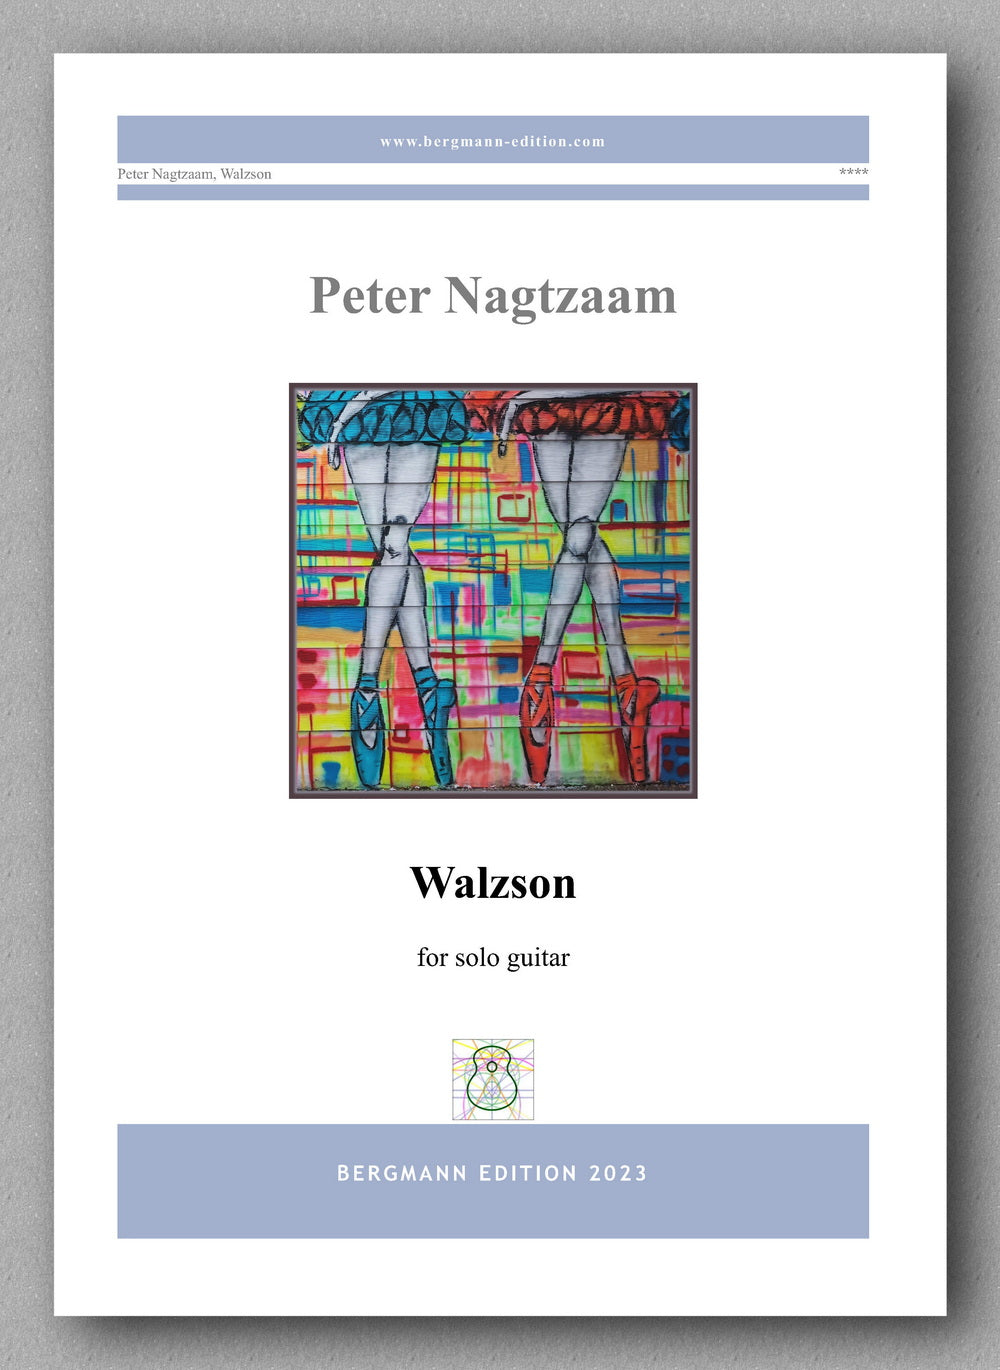 Peter Nagtzaam, Walzson - Preview of the cover